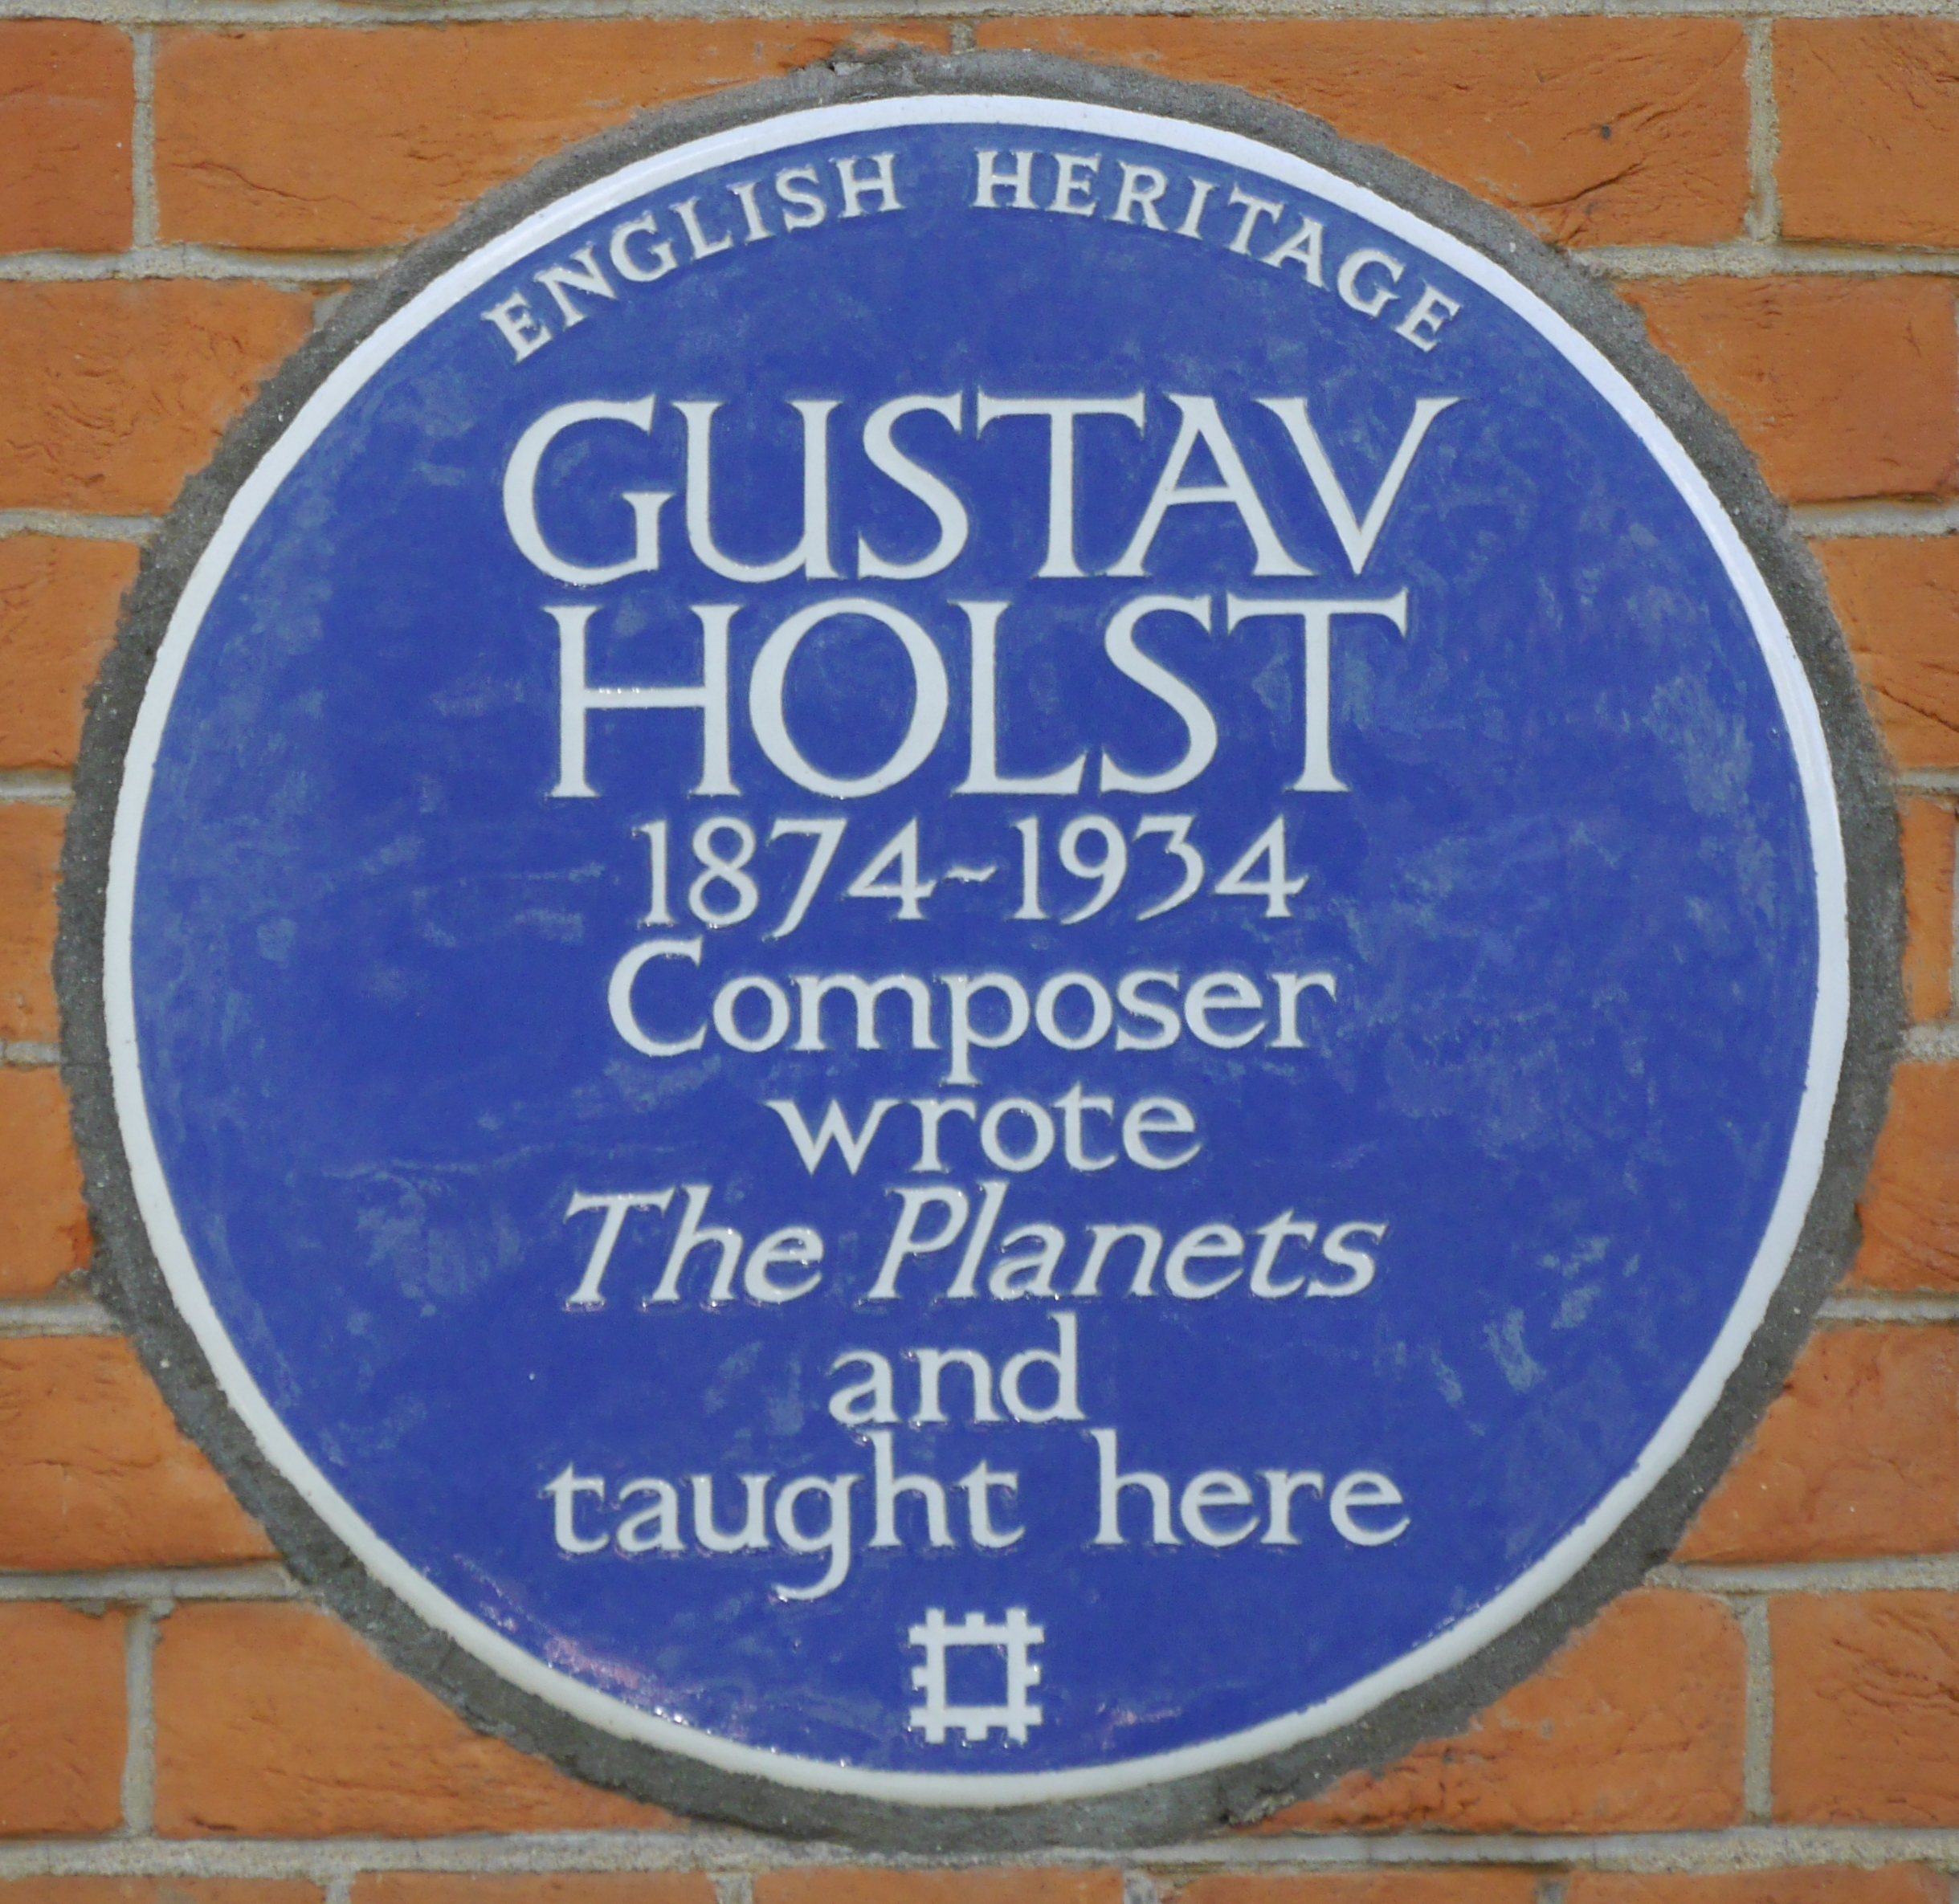 Plaque at St. Paul's Girls' School in London